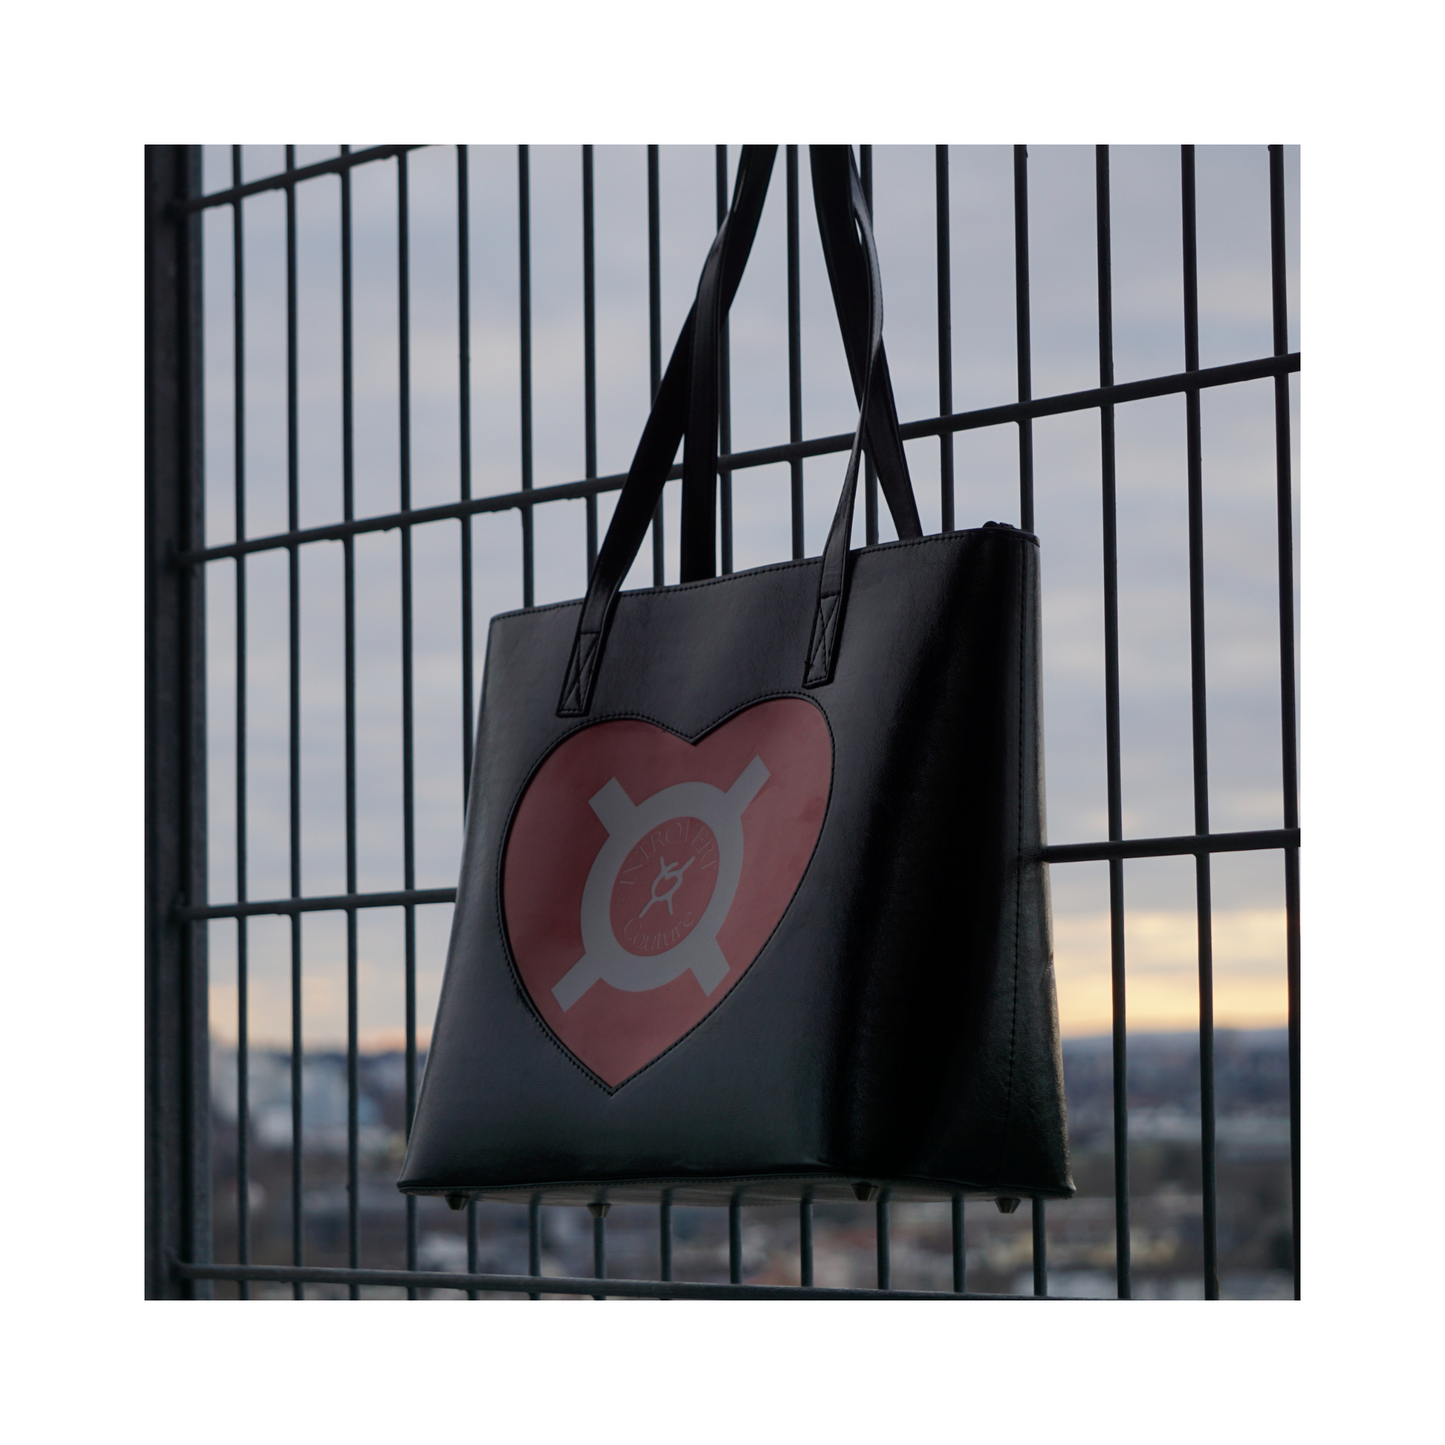 INTROVERT Couture - Heart Tote Bag 24